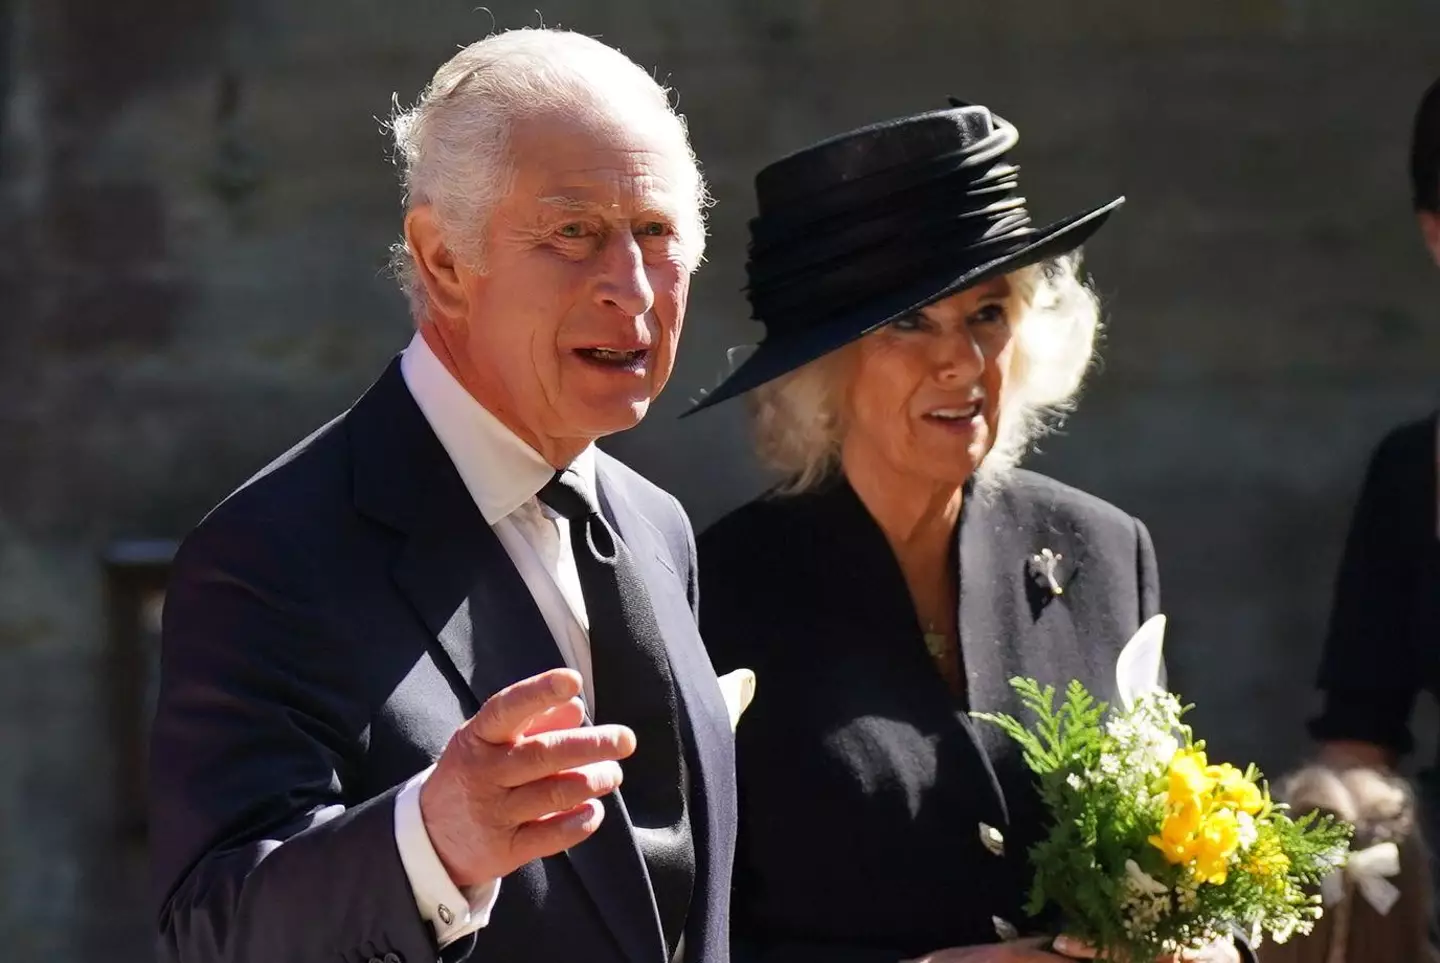 King Charles III and the Queen Consort.